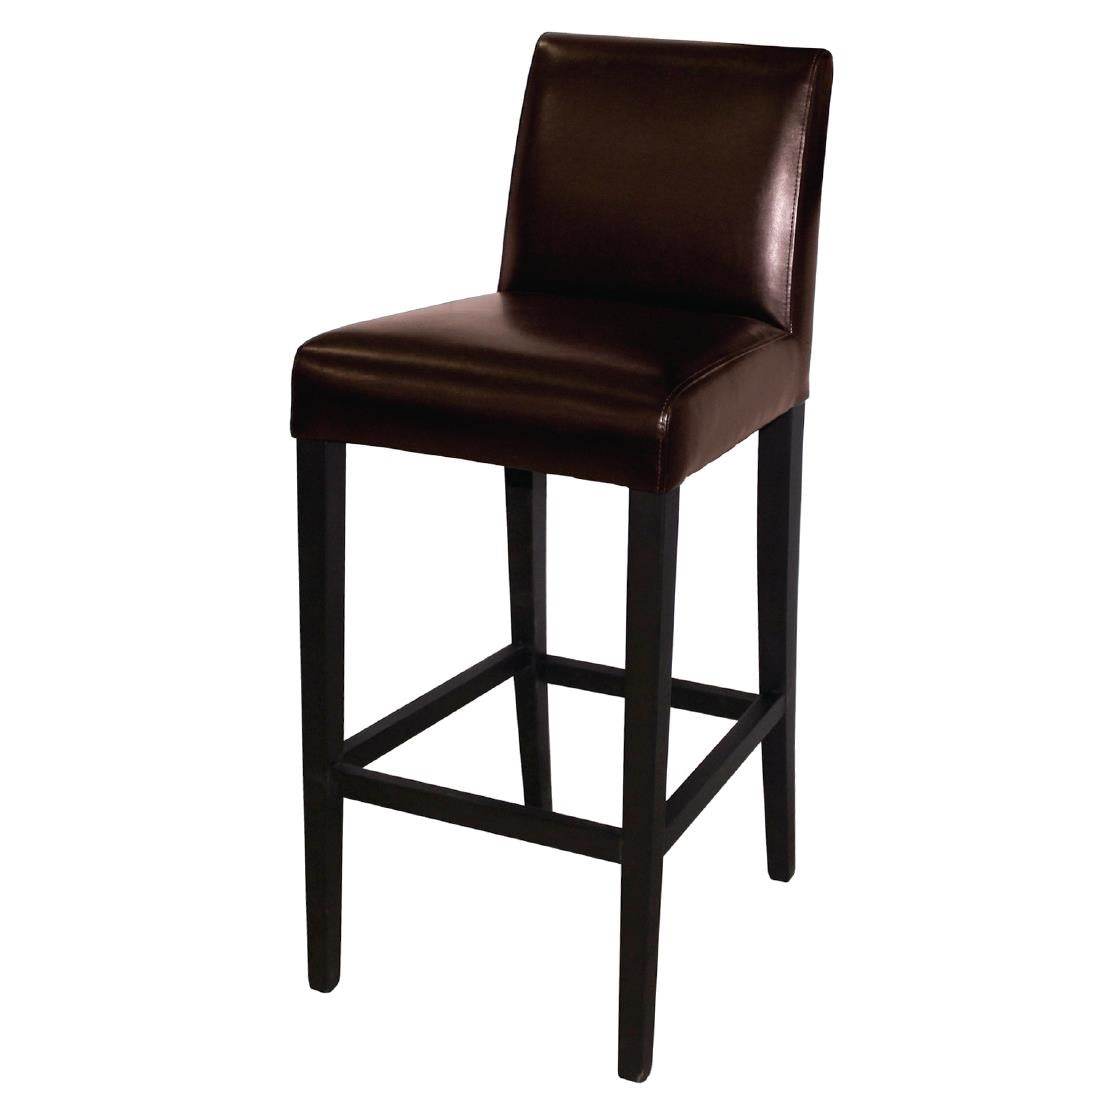 GG652 Bolero Faux Leather High Bar Stool Brown (Single) JD Catering Equipment Solutions Ltd